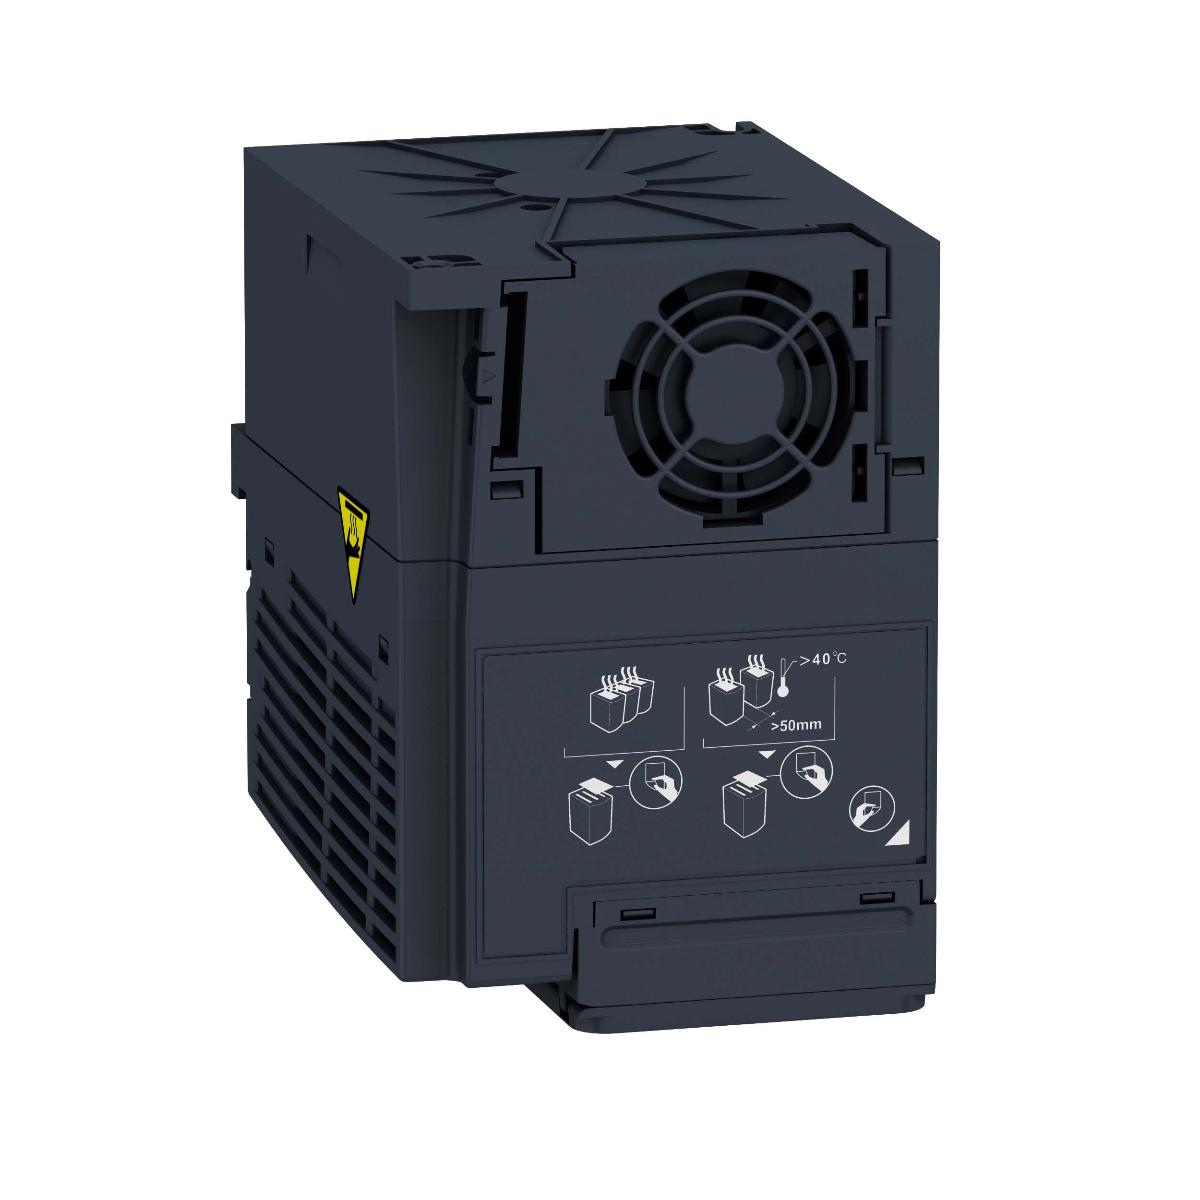 VARIABLE SPEED DRIVE 1.5KW 415V 3P COMP